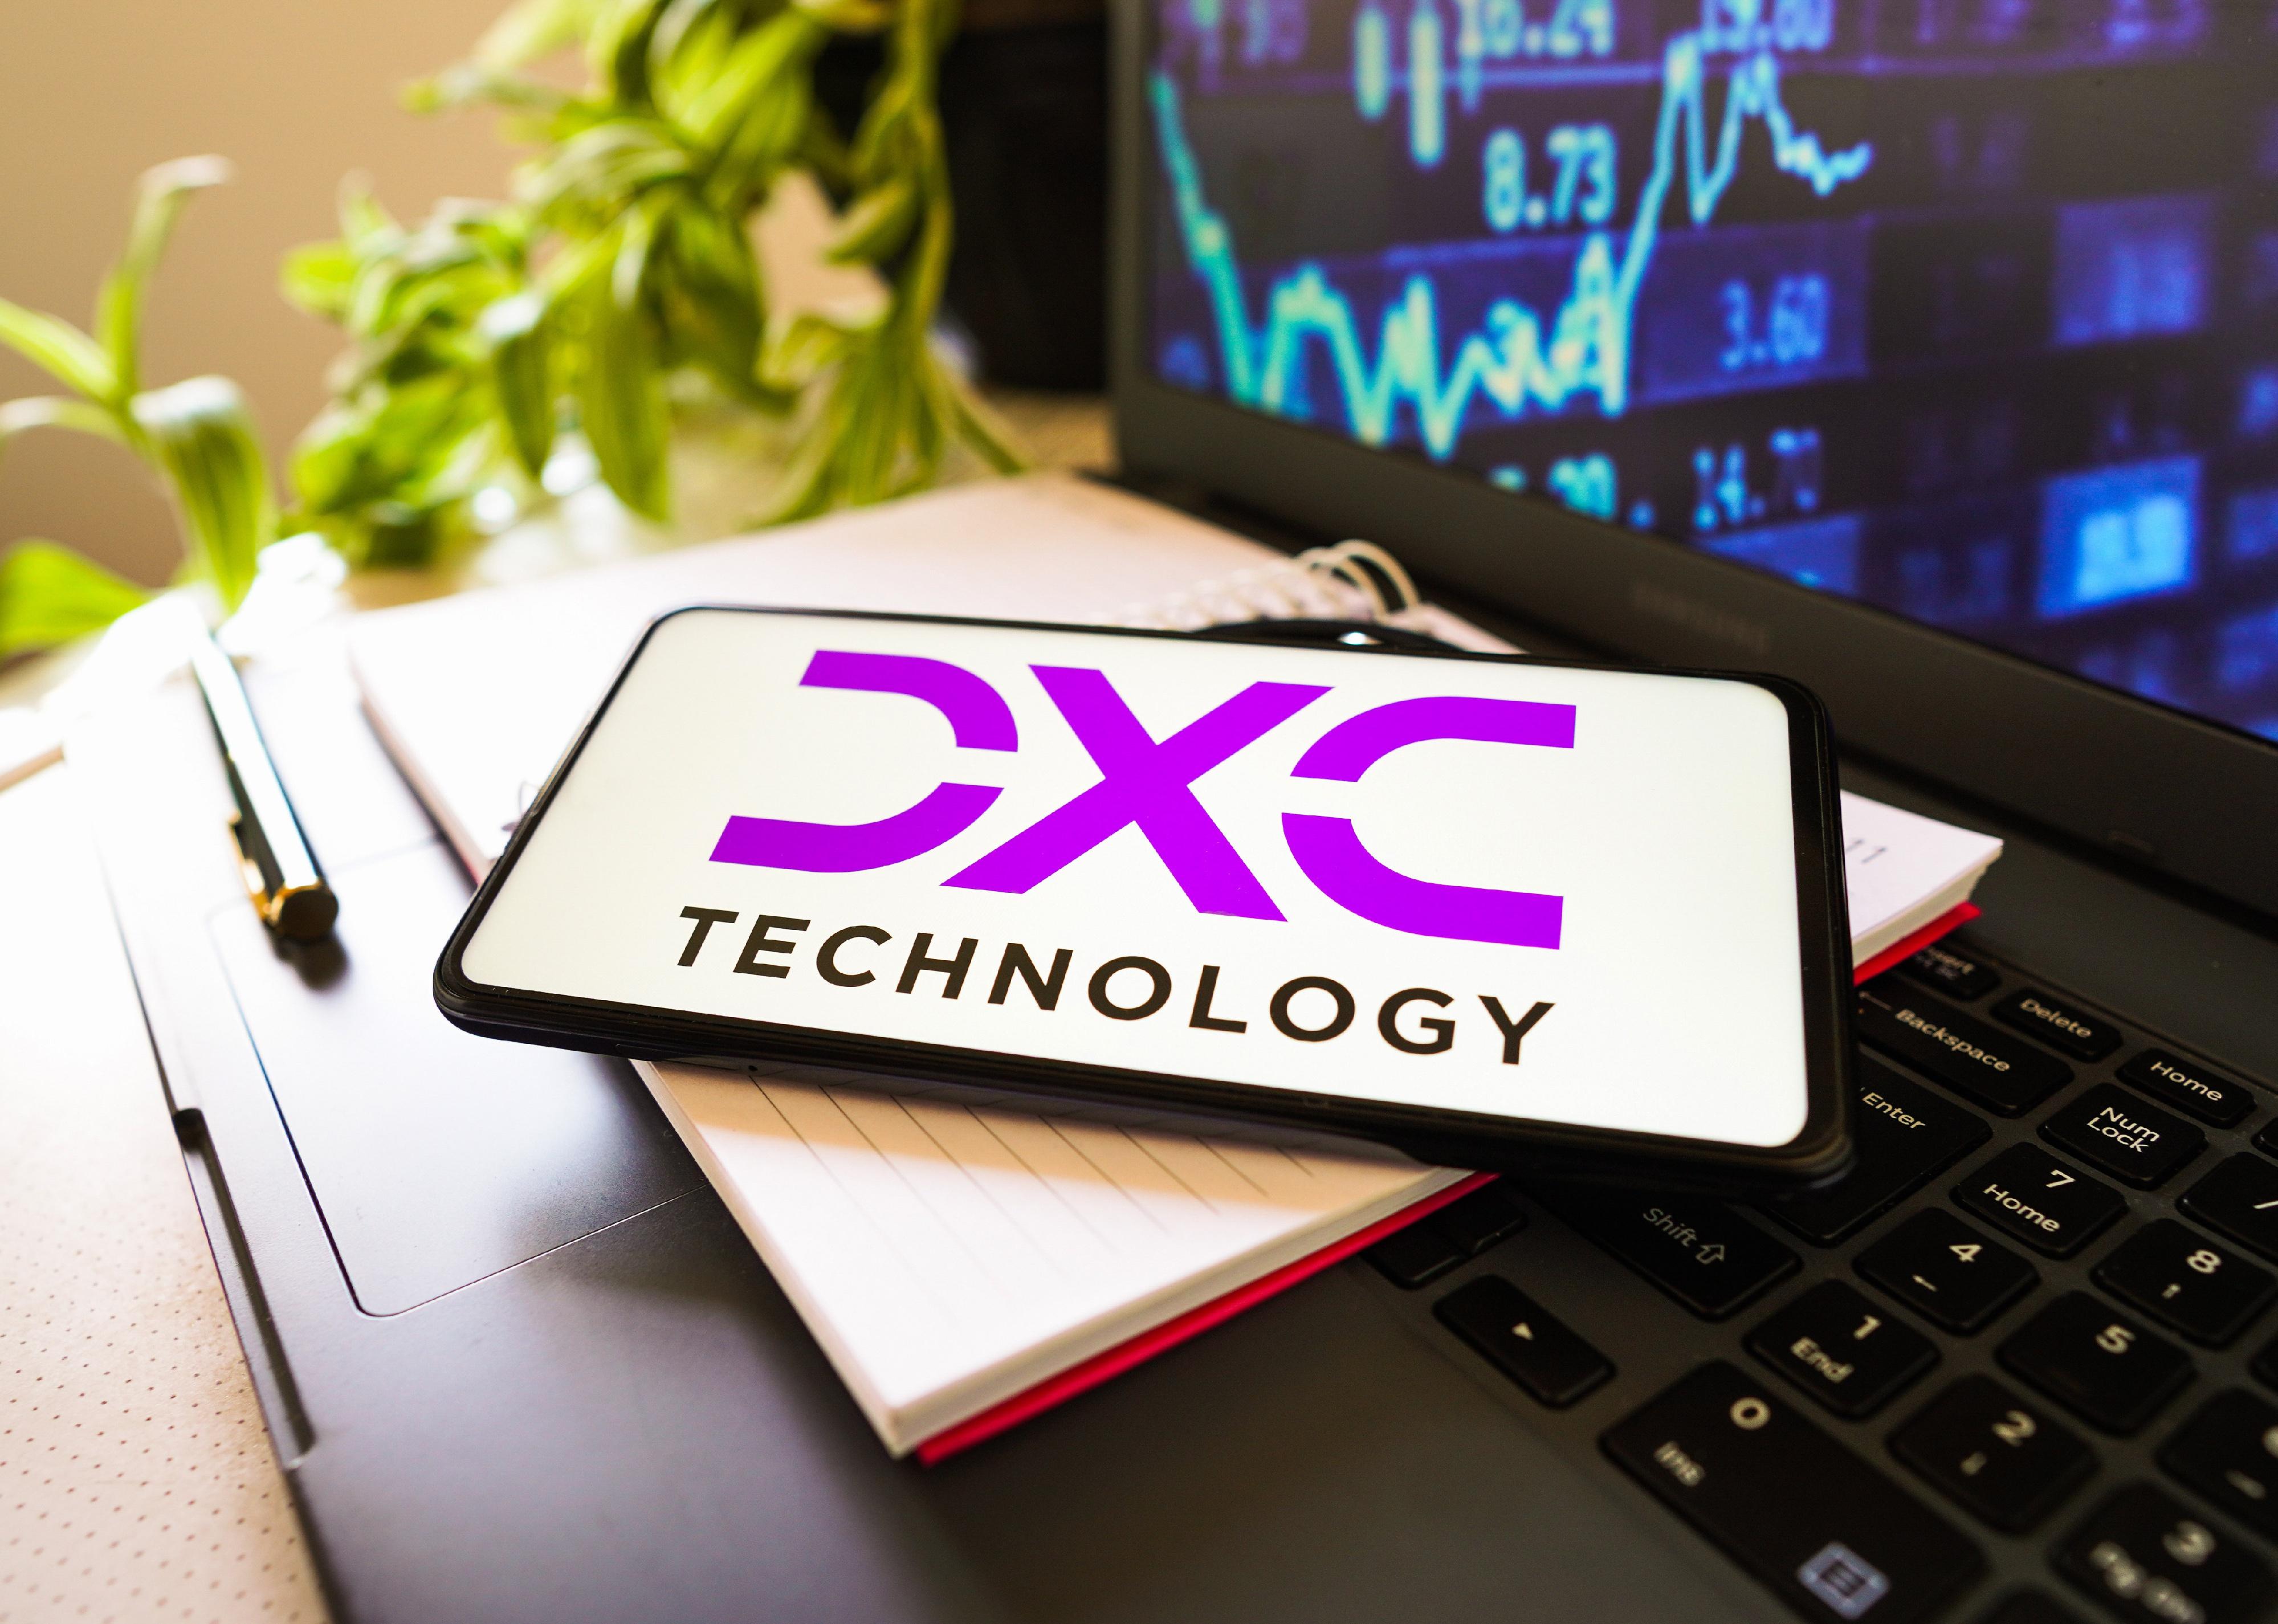 DXC logo on a phone in front of a computer.